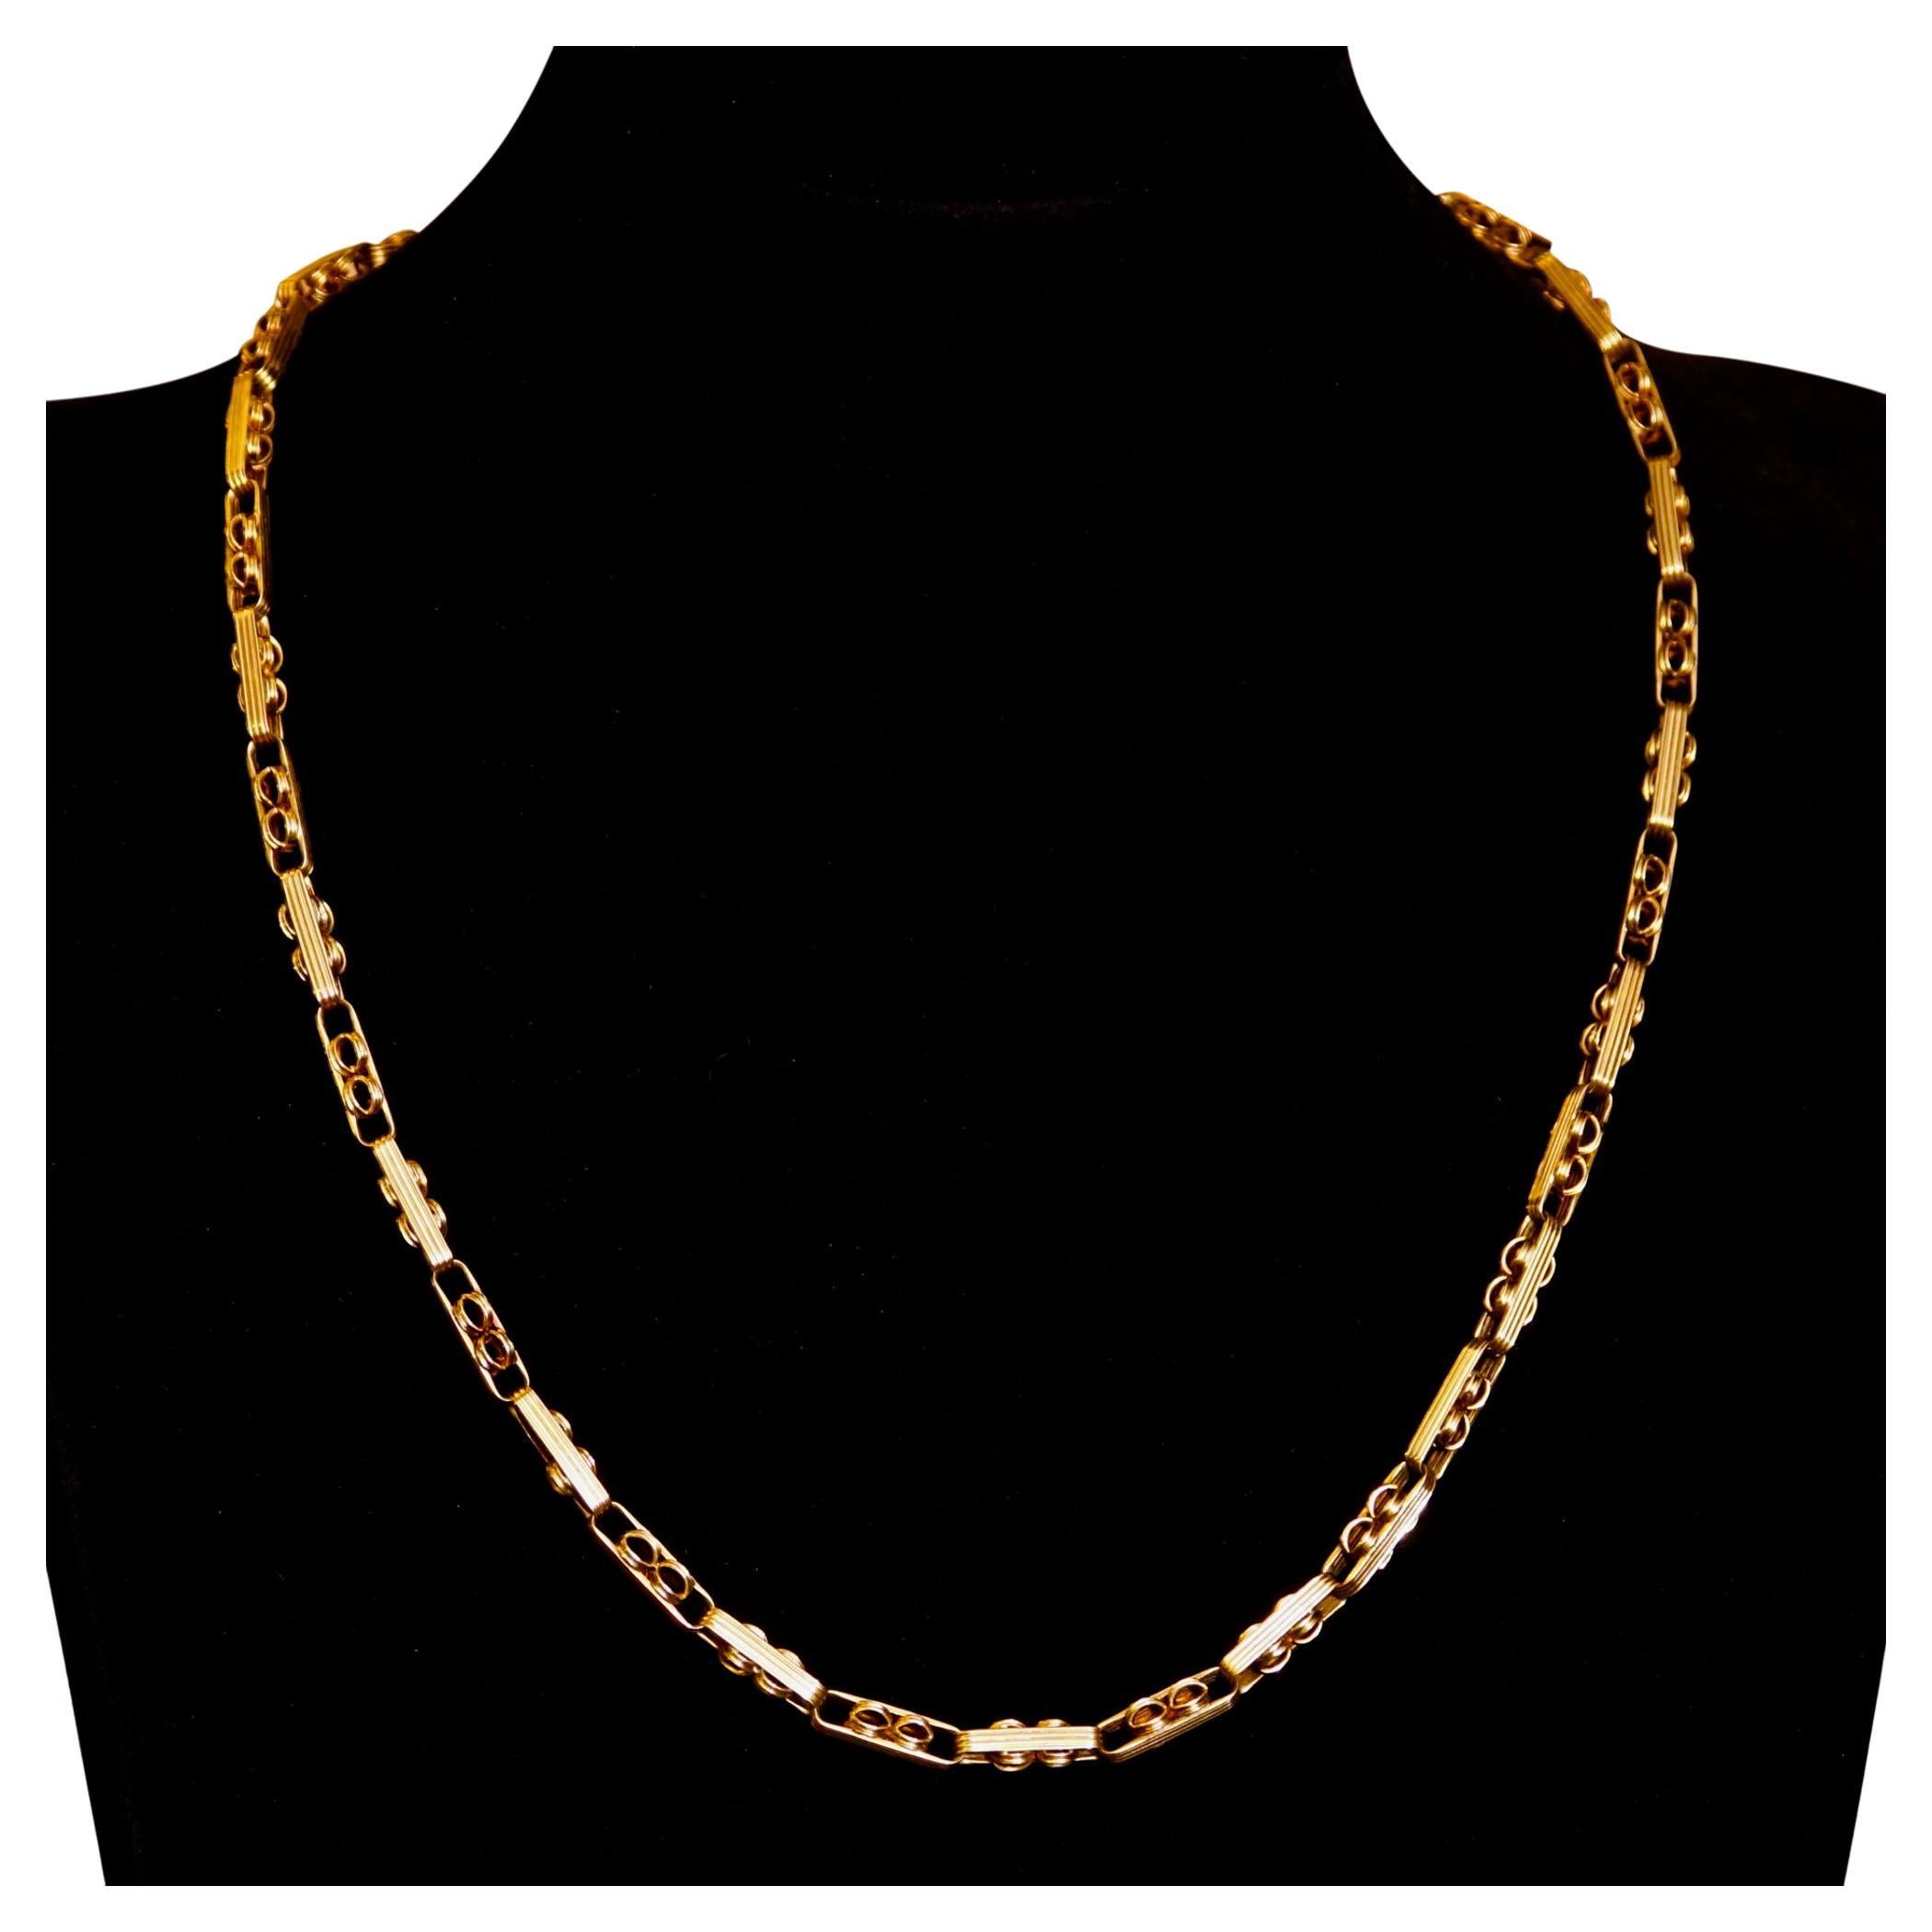 Fancy Infinity Link Chain Necklace in 14k Yellow Gold